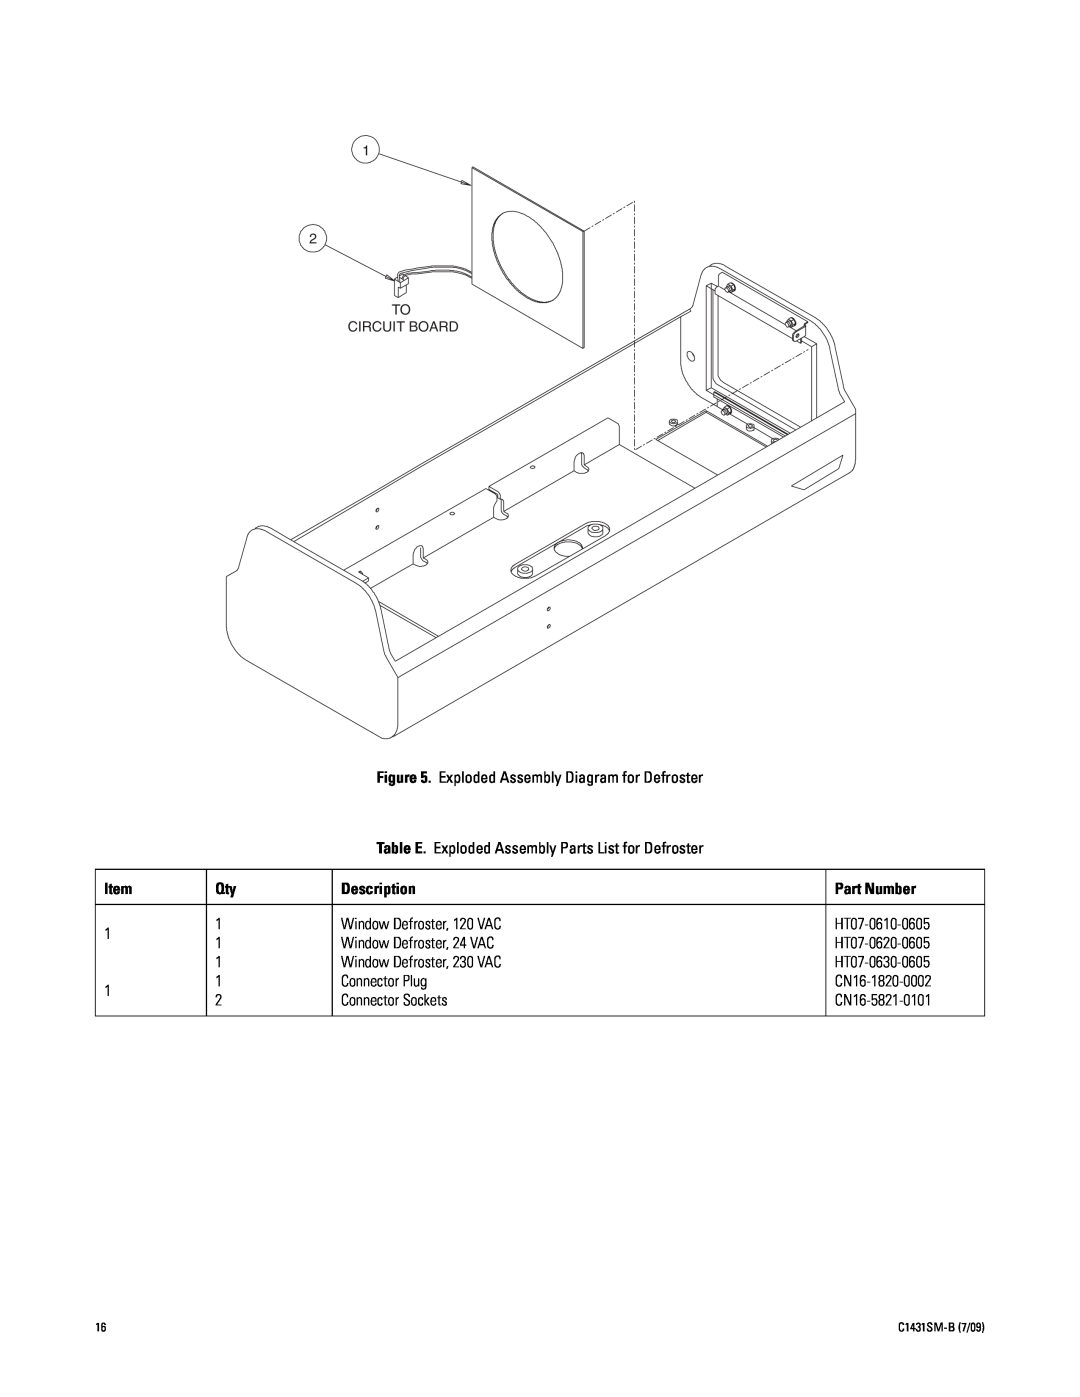 Pelco X1431SM-B (7/09) manual Exploded Assembly Diagram for Defroster, Description, Part Number 